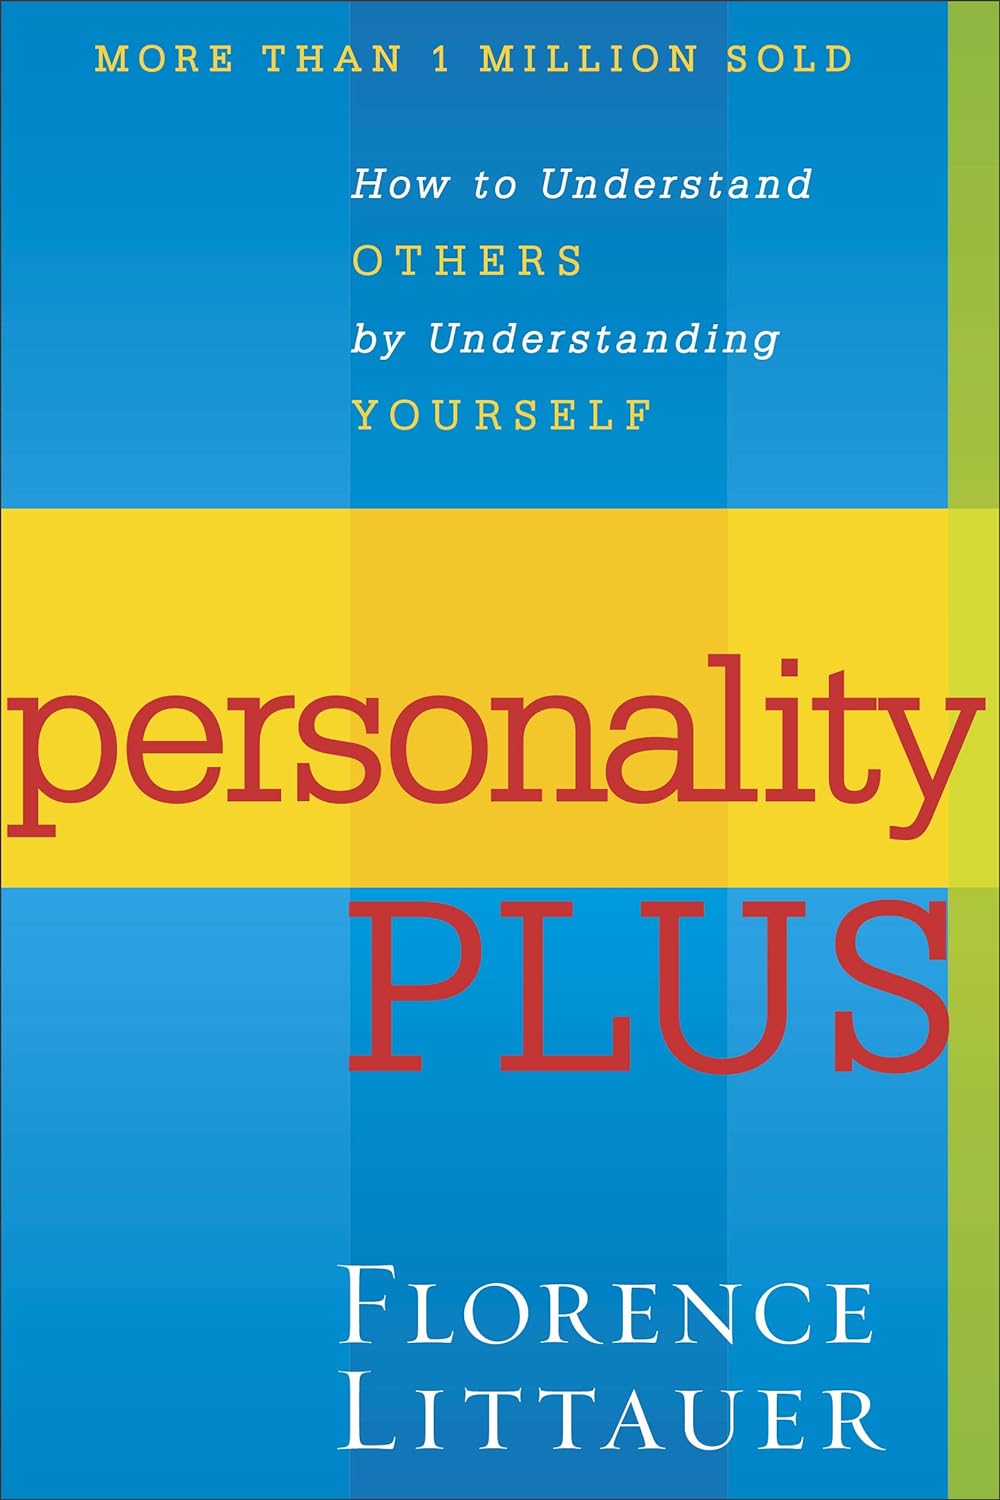 Florence Littauer - Personality Plus